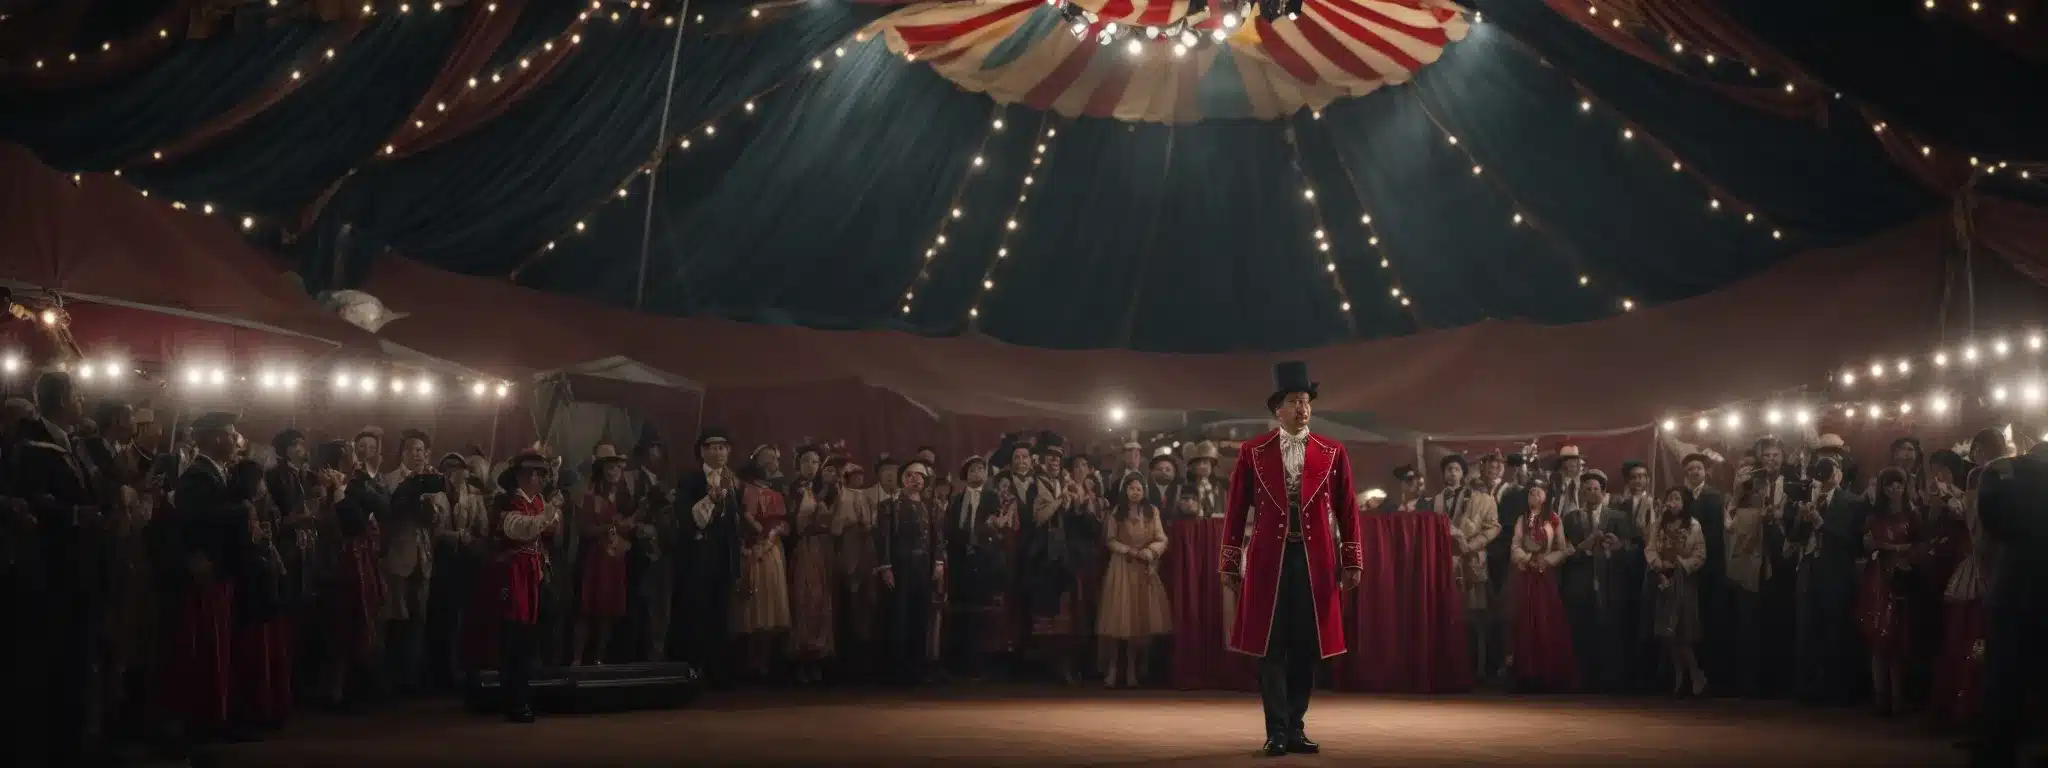 A Ringmaster Confidently Standing Center Stage Under The Big Top, Orchestrating A Captivating Circus Performance.